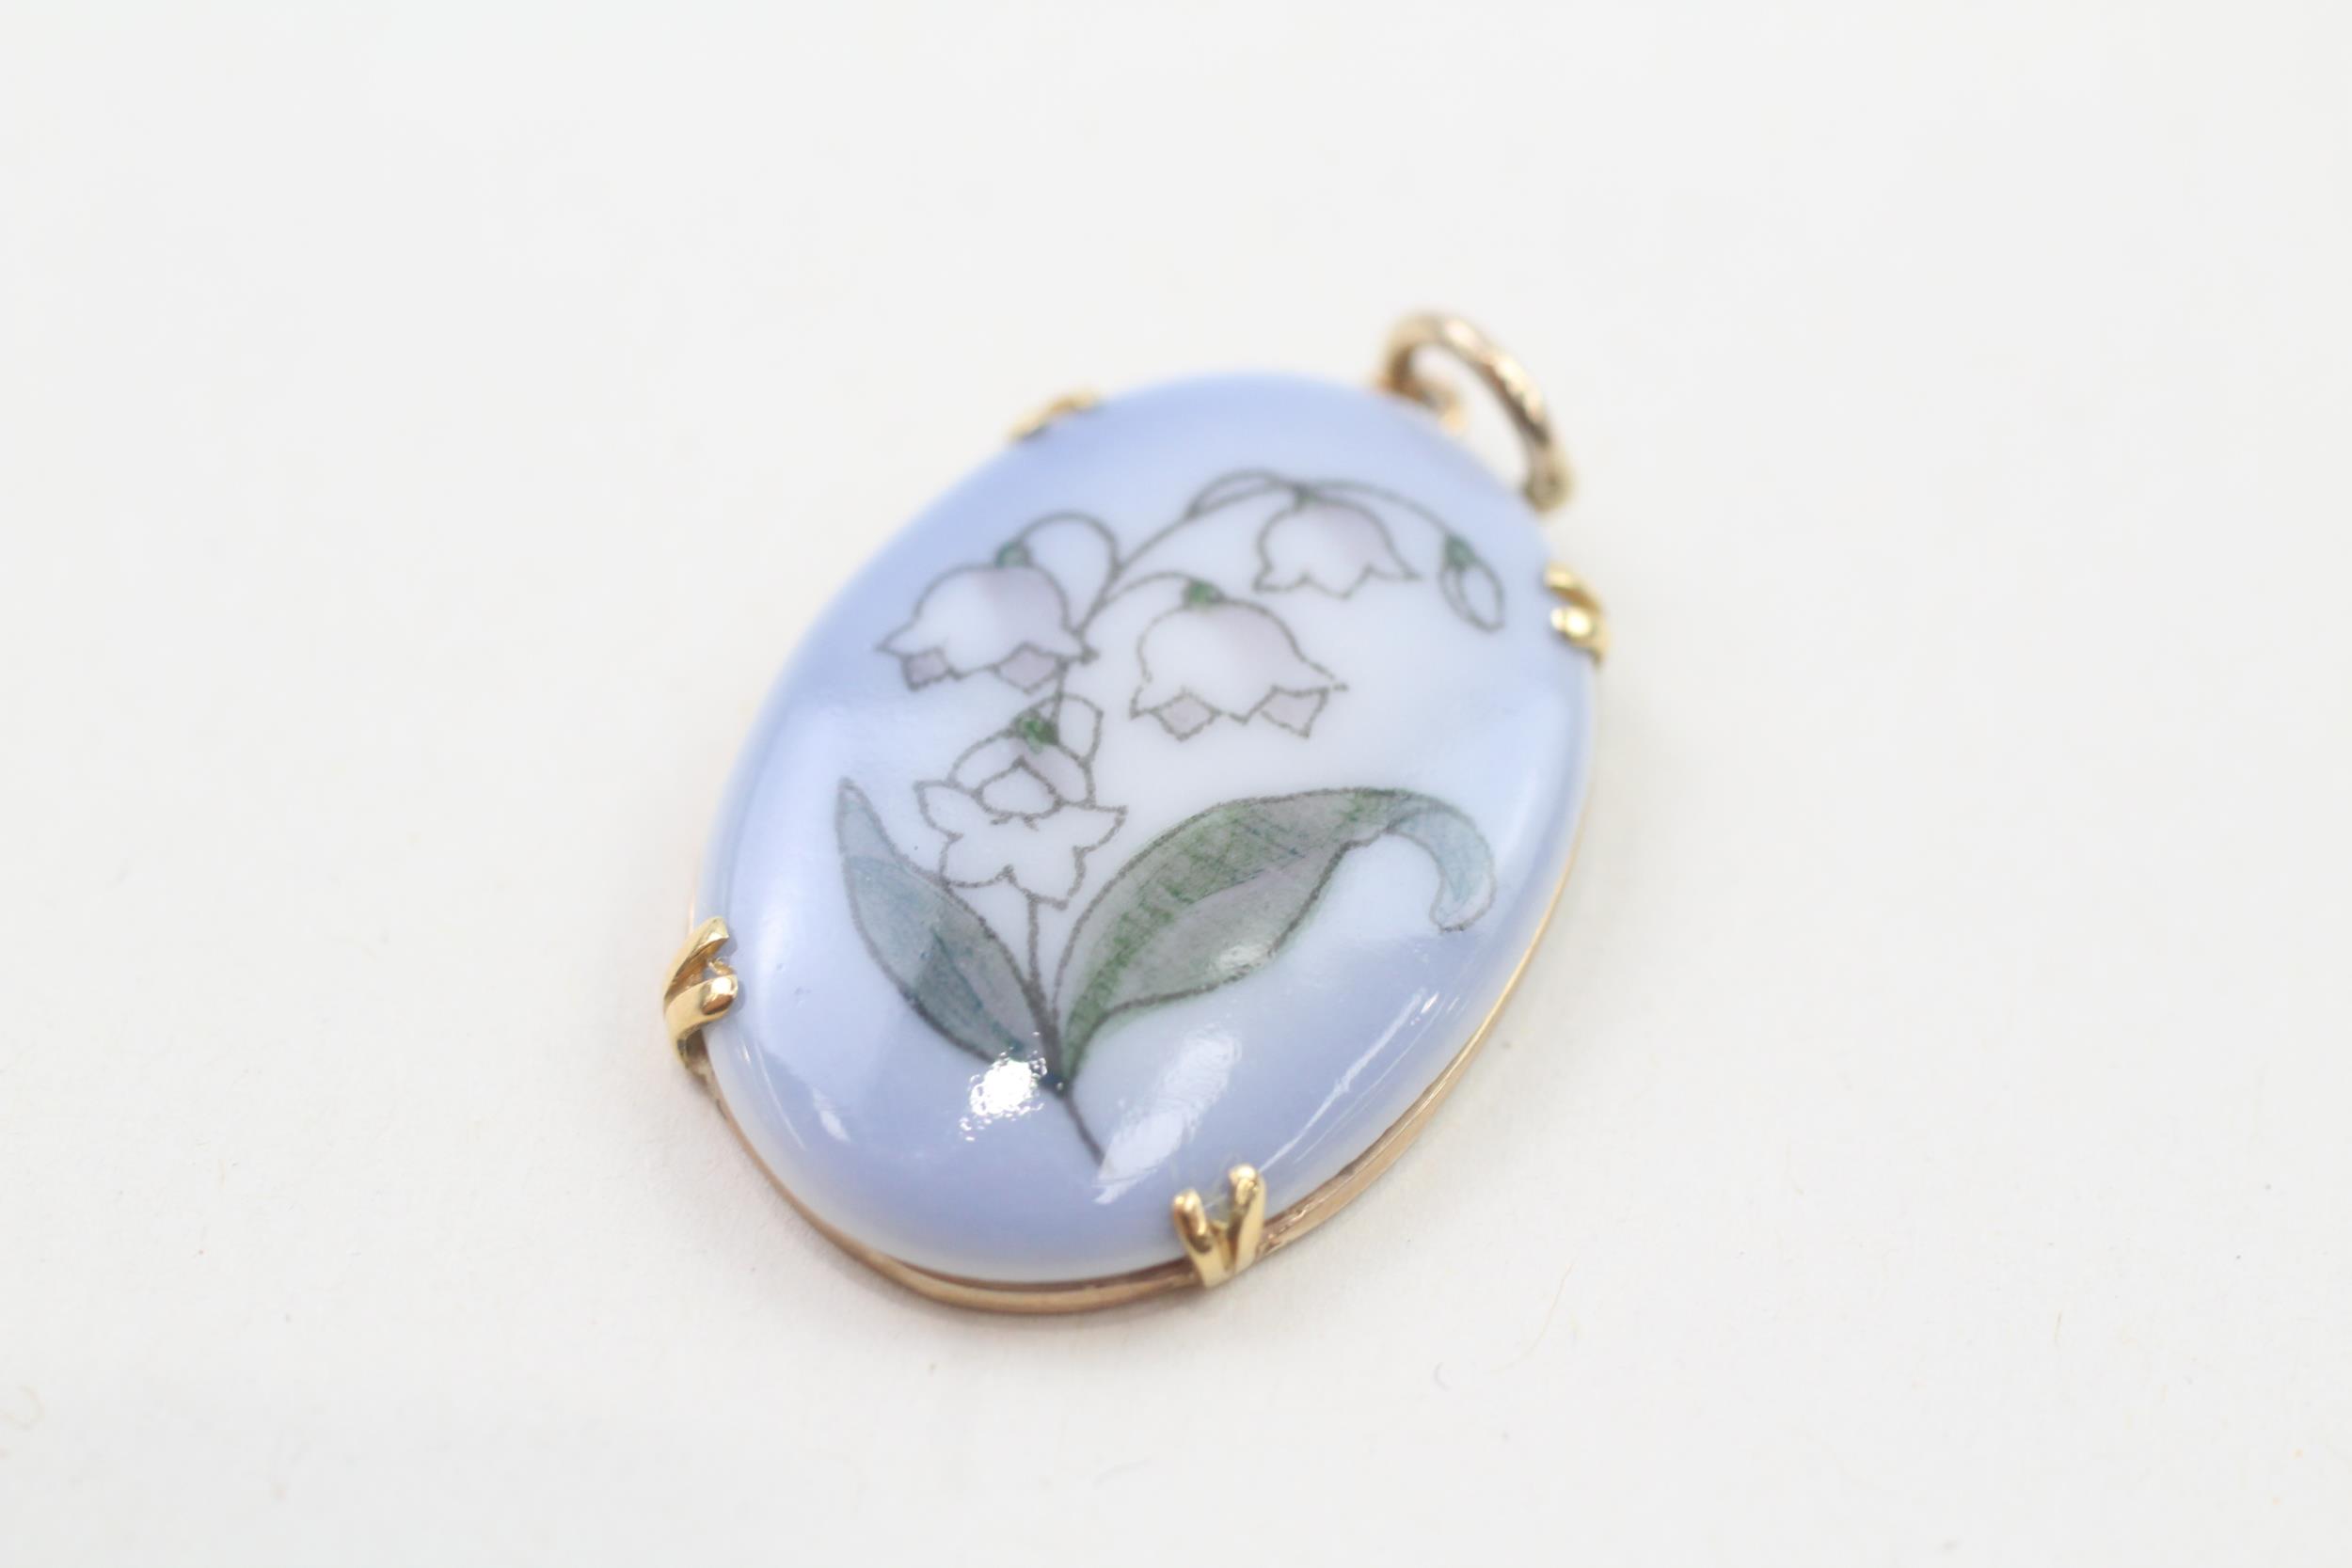 9ct gold lilly of the valley, danish porcelain pendant by Bing & Grondahl (3.2g) - Image 4 of 5